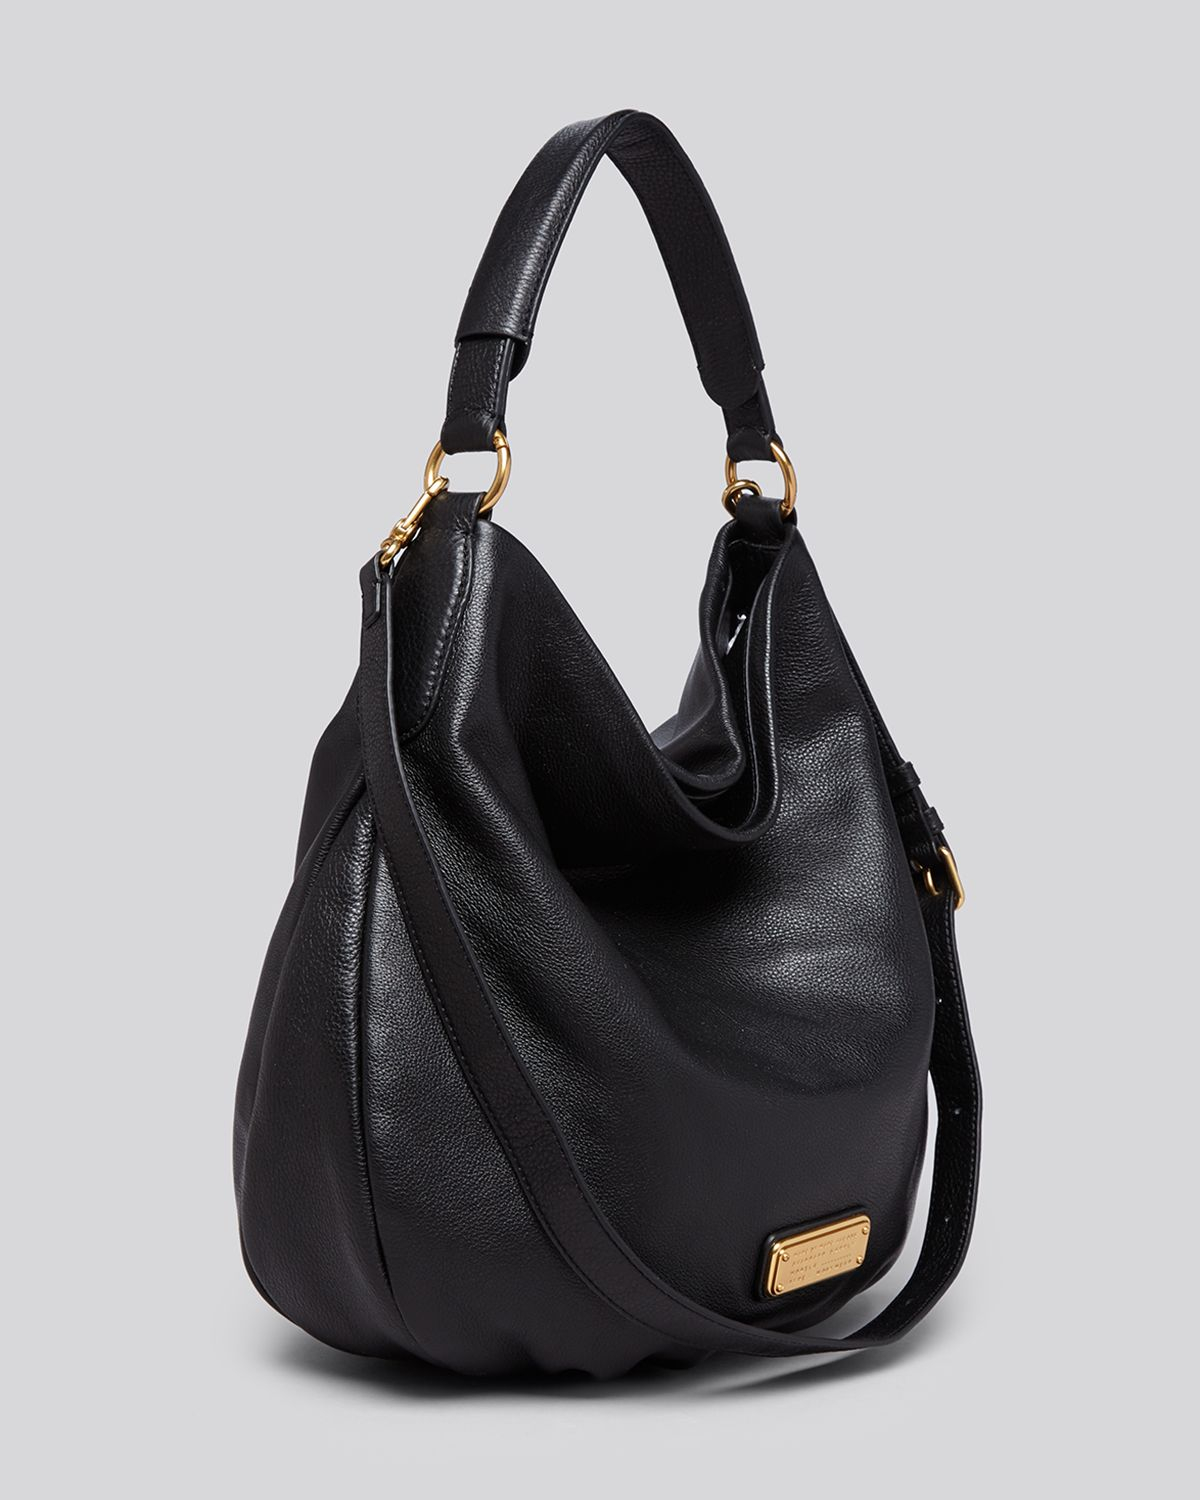 Lyst - Marc By Marc Jacobs Hobo - New Q Hillier in Black